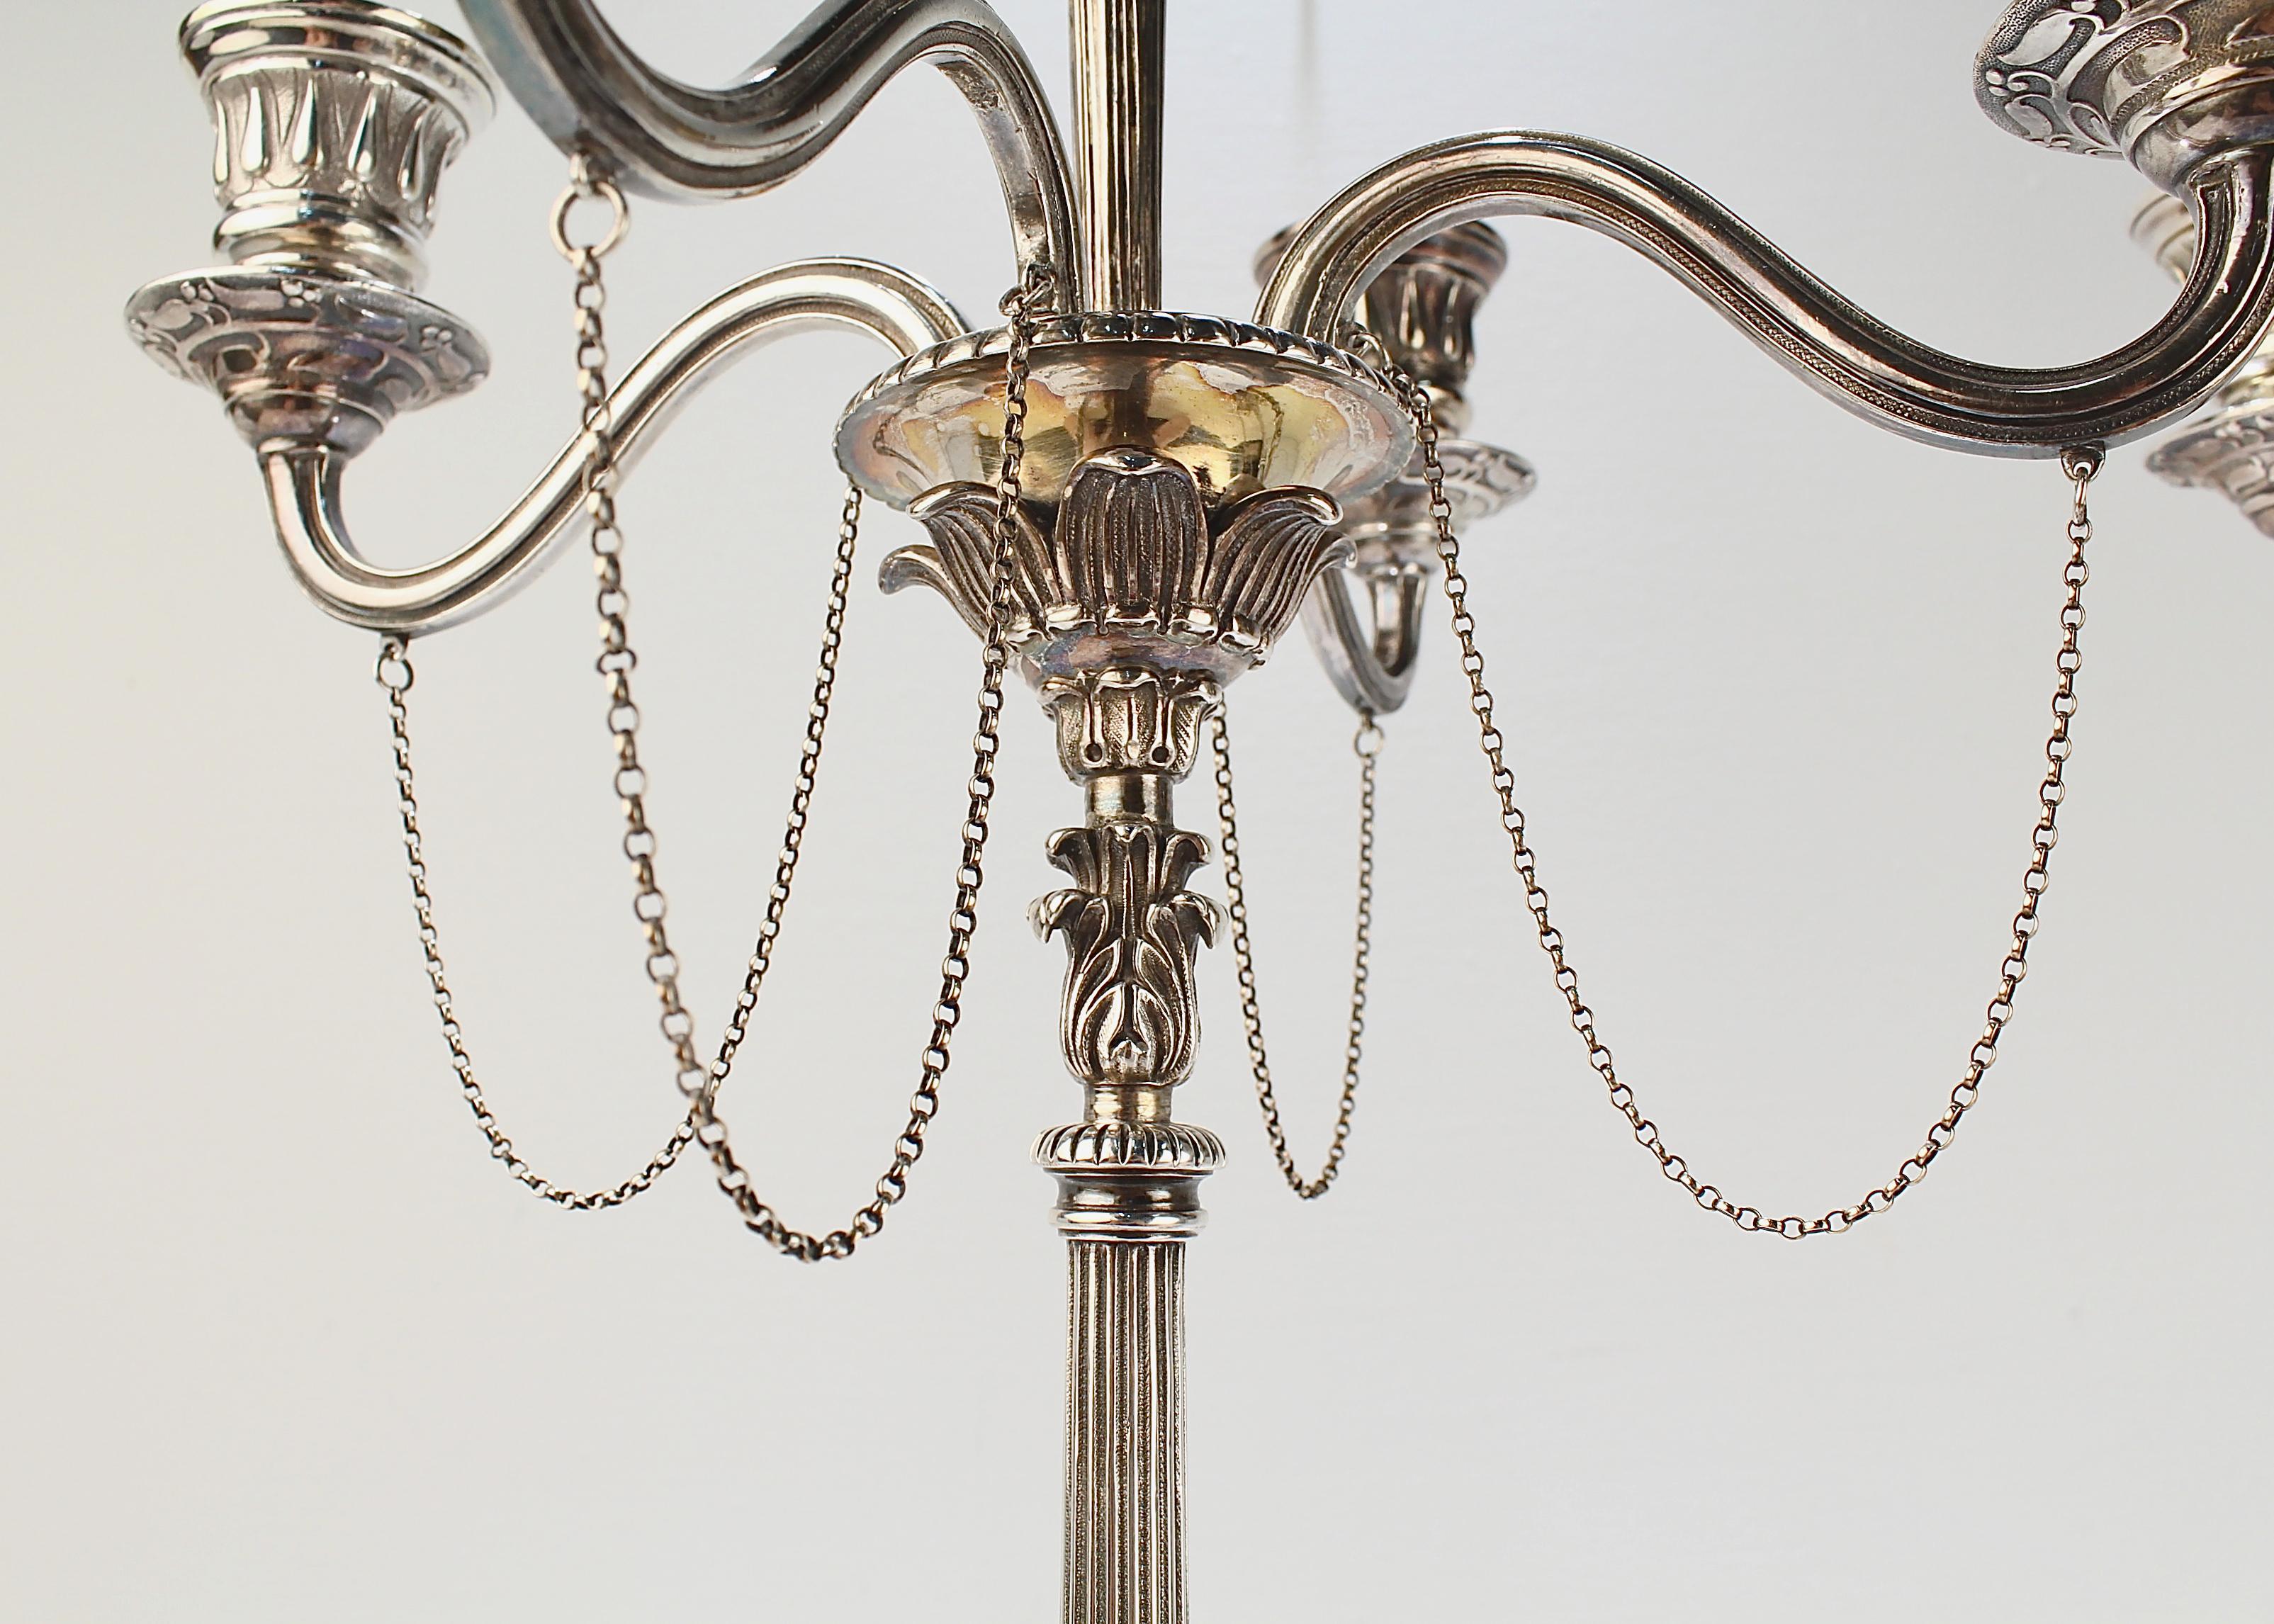 Pair of Elkington & Co Neoclassical Revival Silver Plated Five-Light Candelabra For Sale 8